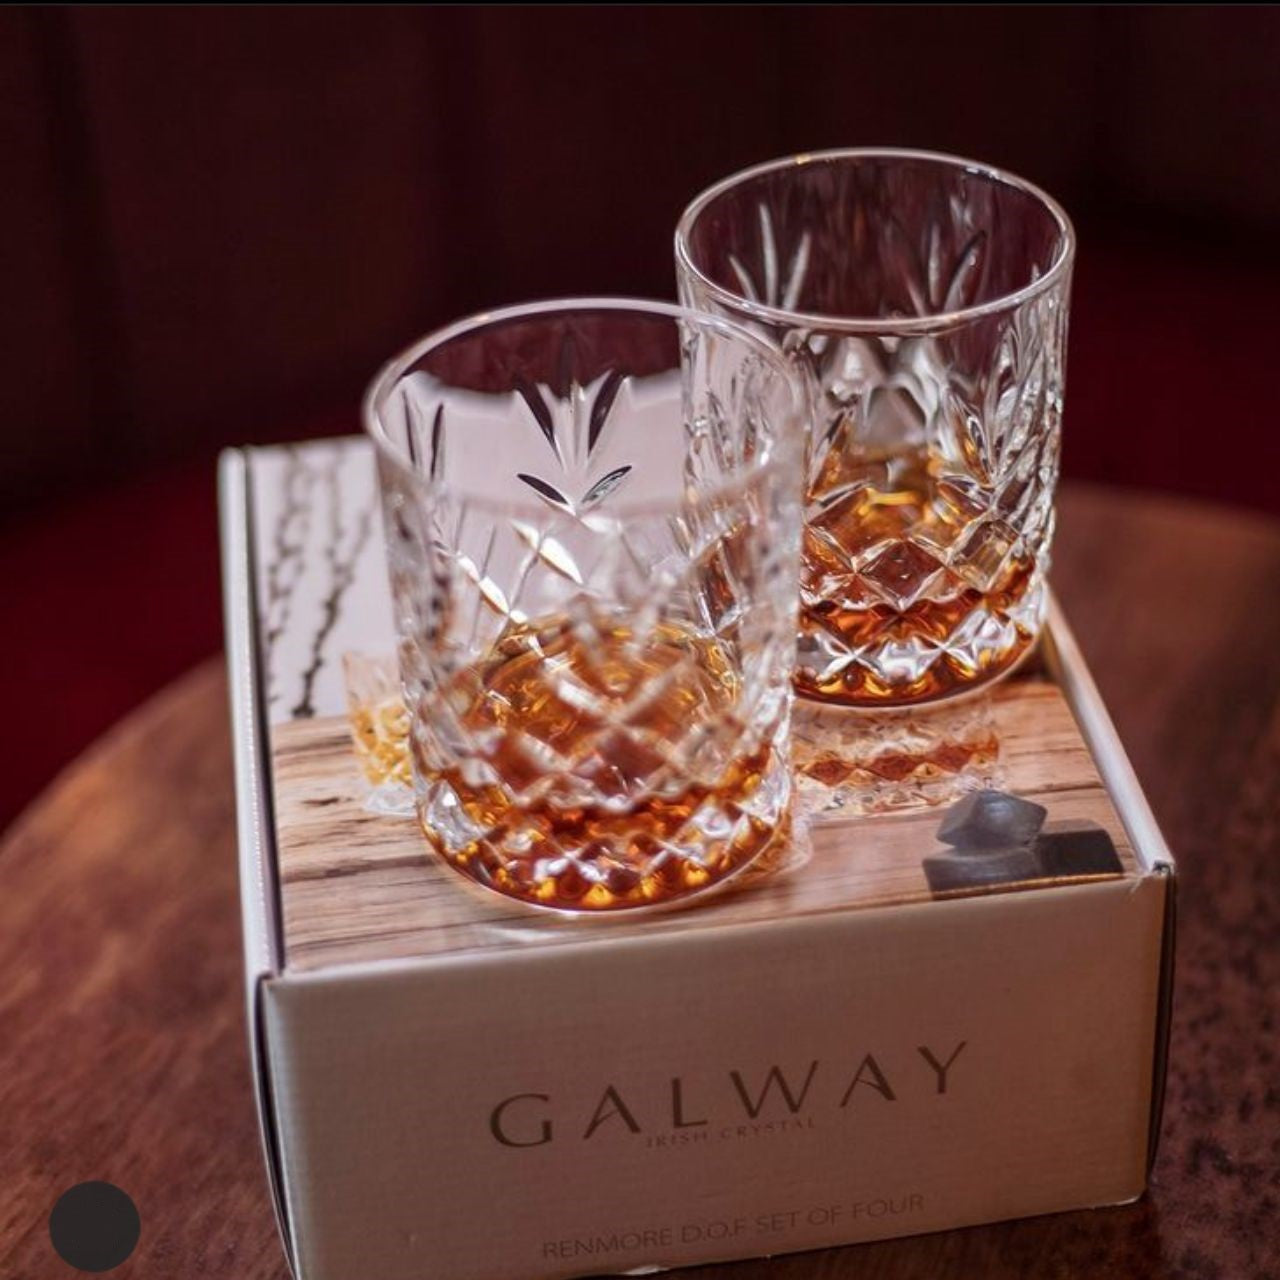 Galway Crystal Renmore DOF Tumbler Pair  The stunning Galway Crystal Renmore DOF Tumbler Pair will make the perfect statement piece for your table this season. With their beautiful cut they will make an ideal gift for any occasion.